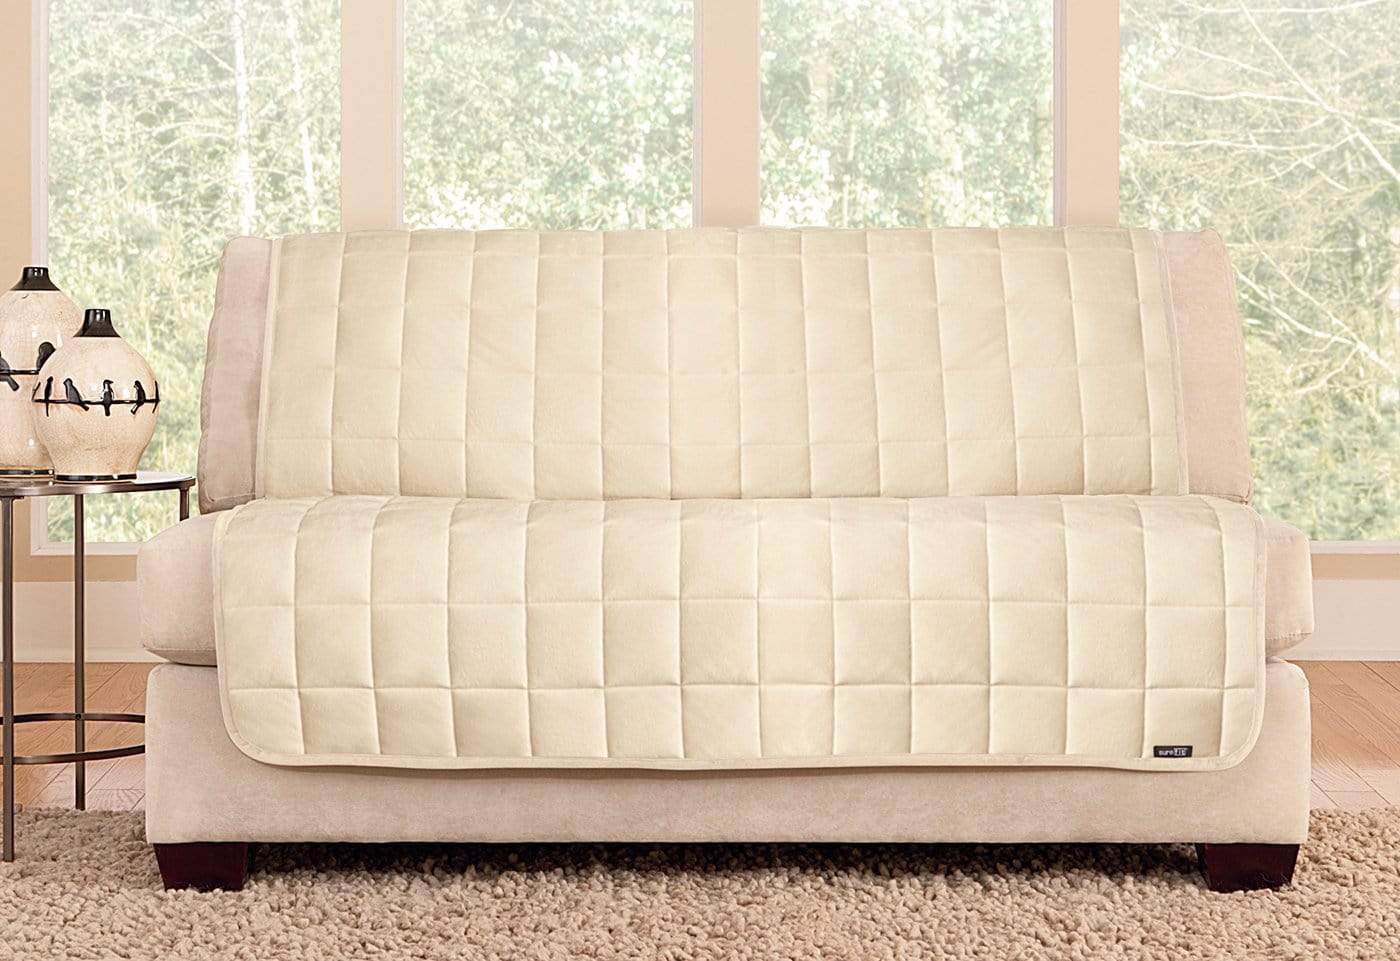 SureFit Deluxe Comfort Armless Loveseat Furniture Protector   Antimicrobial   Pet Furniture Cover   Machine Washable in Ivory